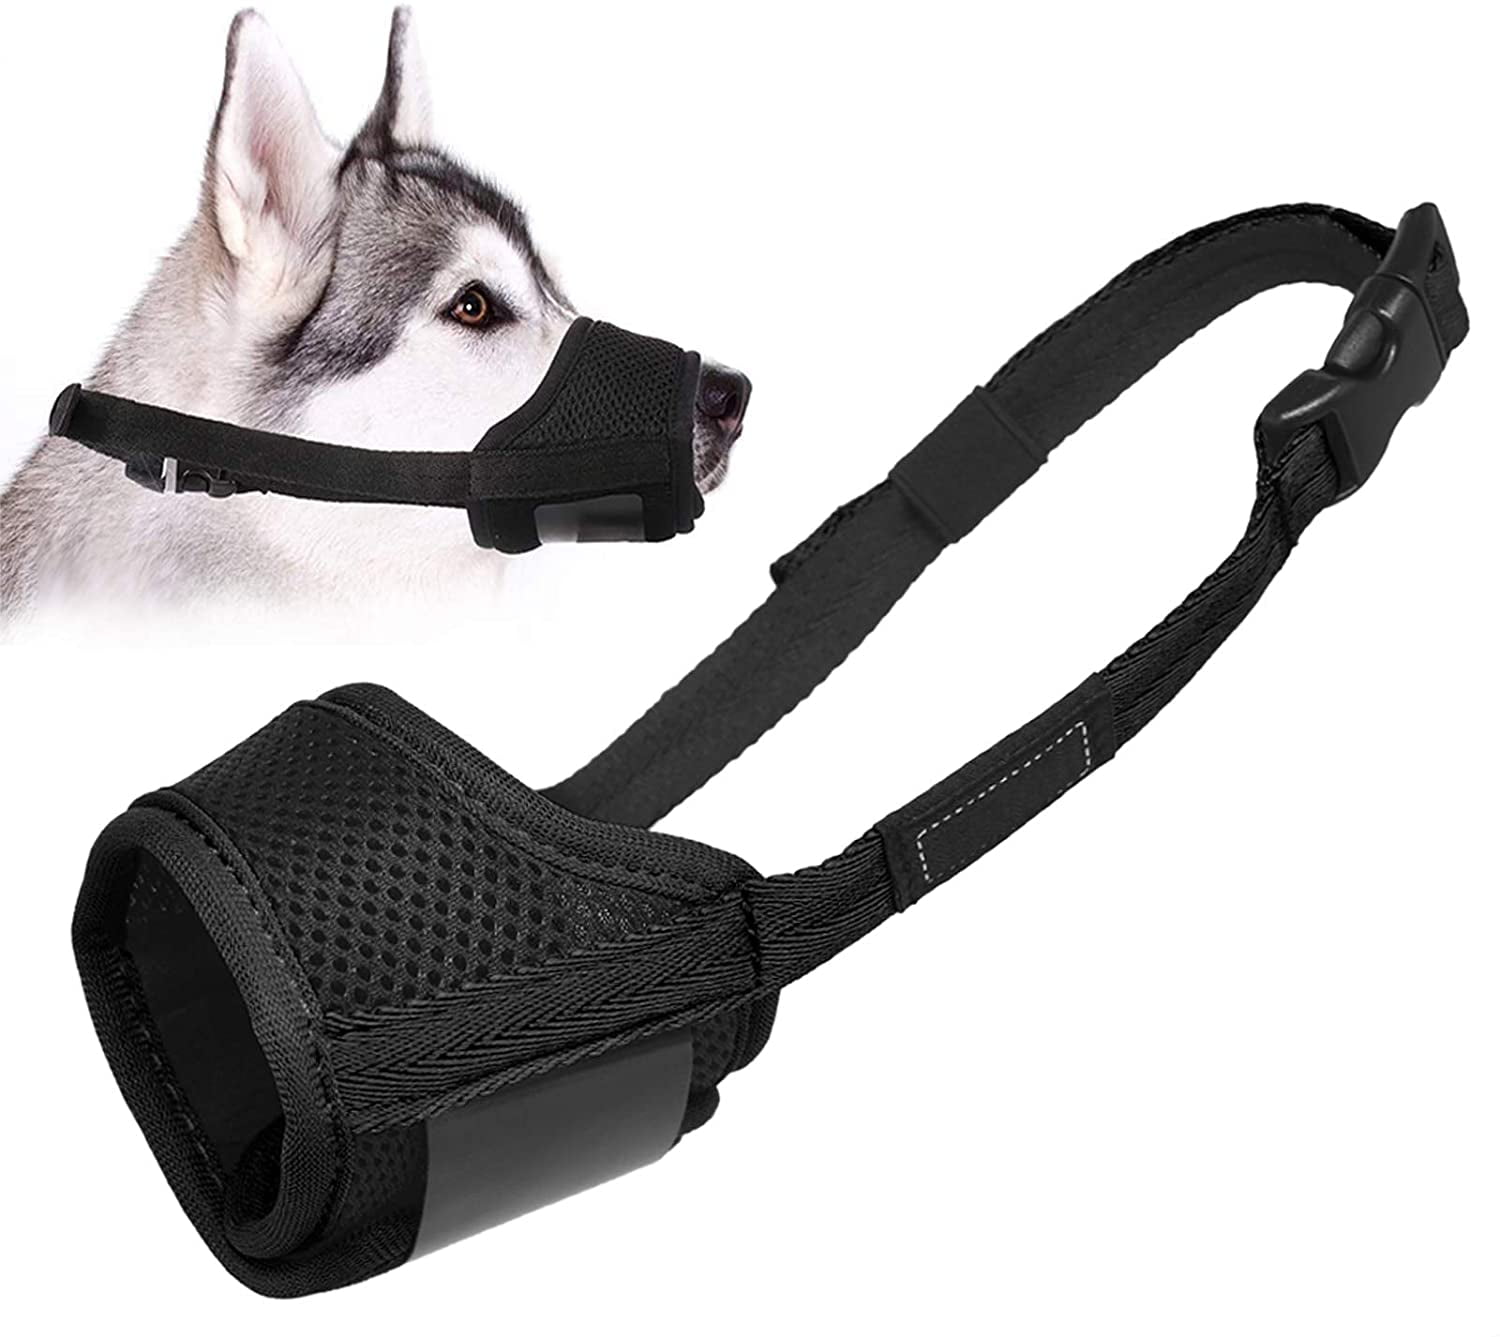 Adjustable and Breathable Chewing Lepark Dog Muzzle with Soft Fabric Padded to Prevent Biting Medium and Large Dogs for Small 